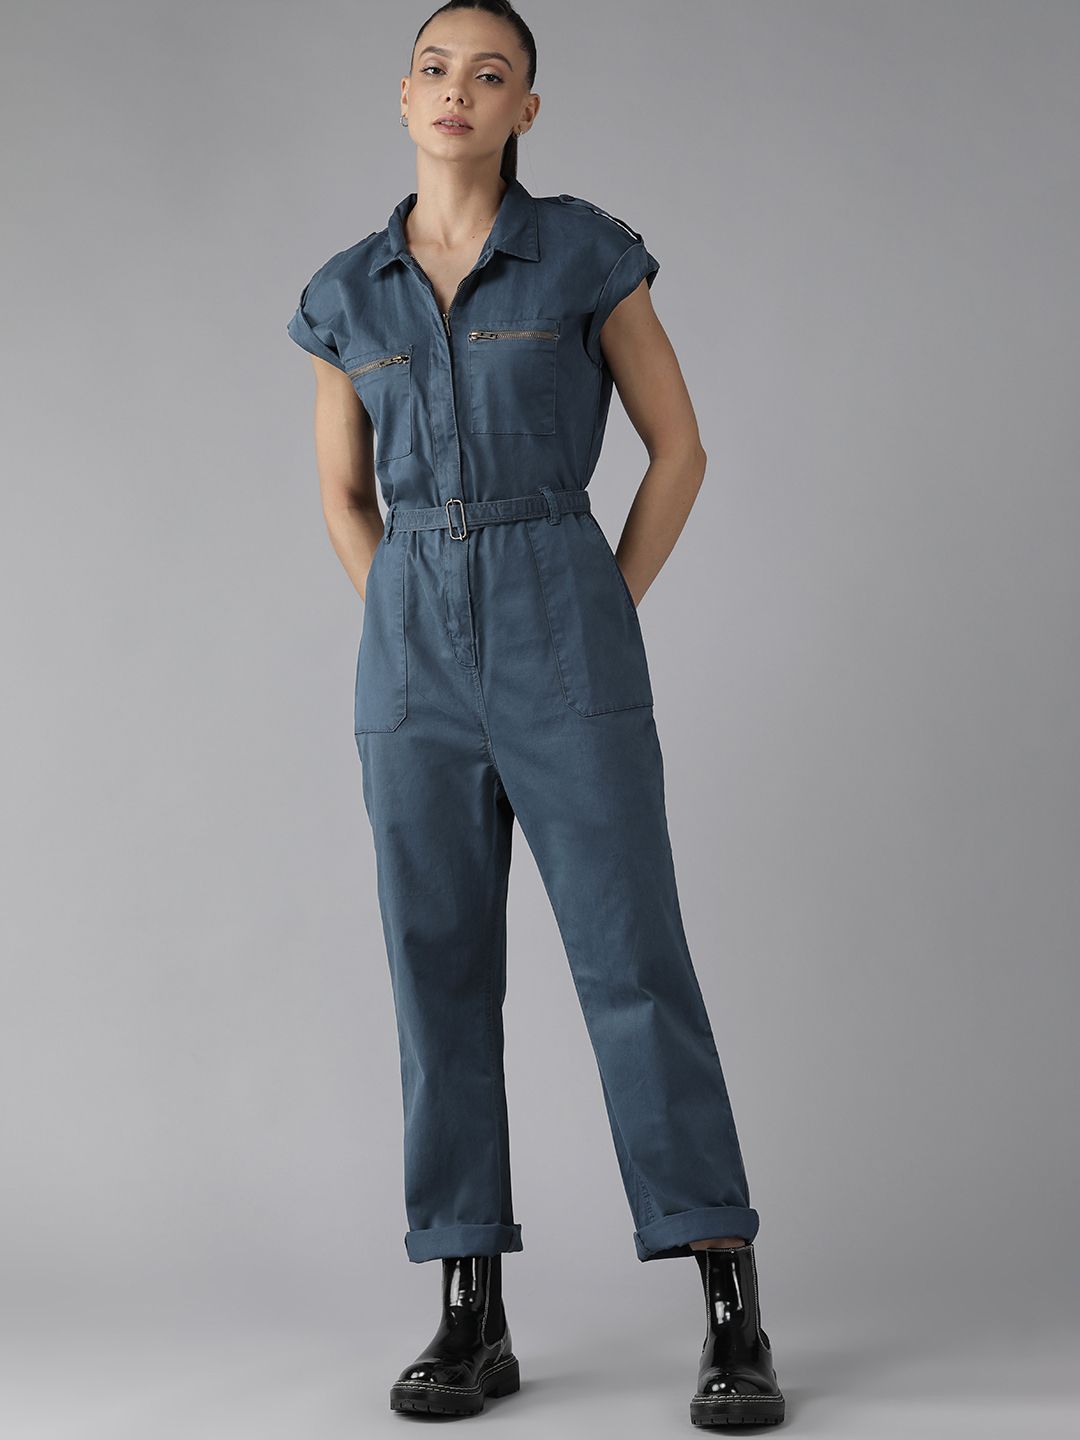 Roadster Women Teal Blue Solid Boiler Jumpsuit With Fabric Belt Price in India